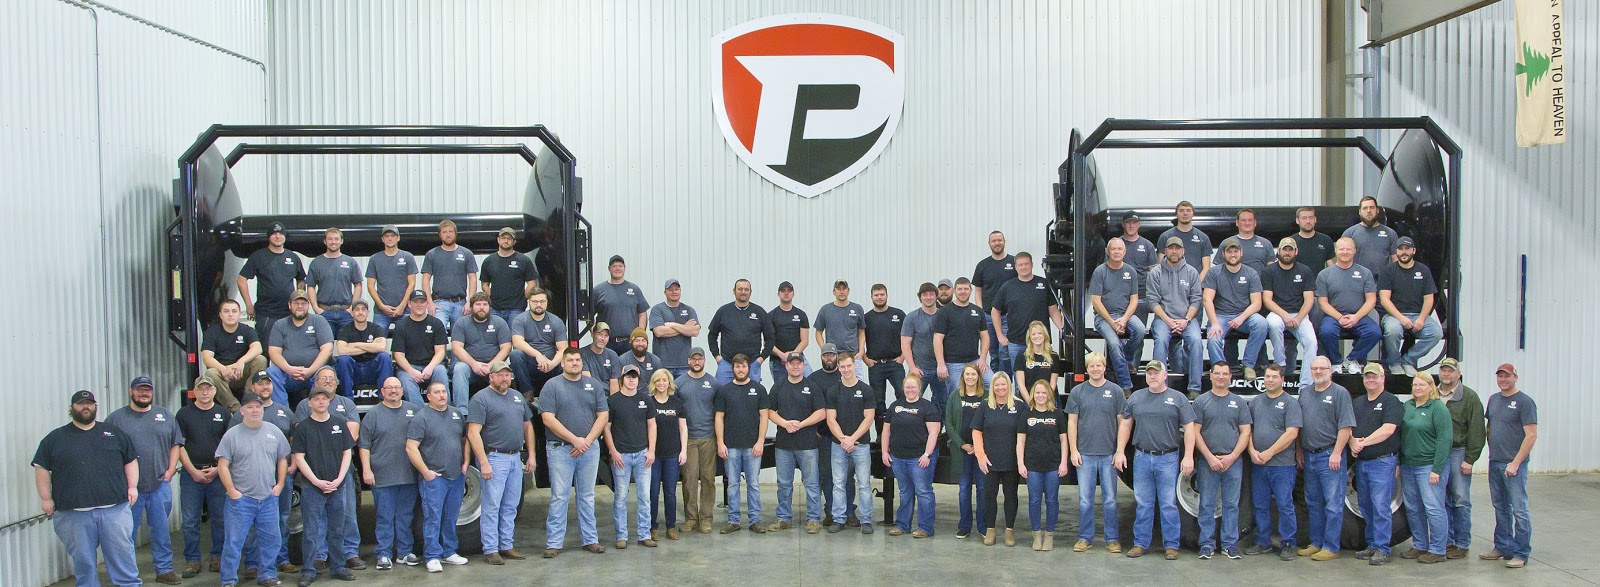 Puck Enterprises: 40 Years of Excellence Here in Western Iowa! Main Photo